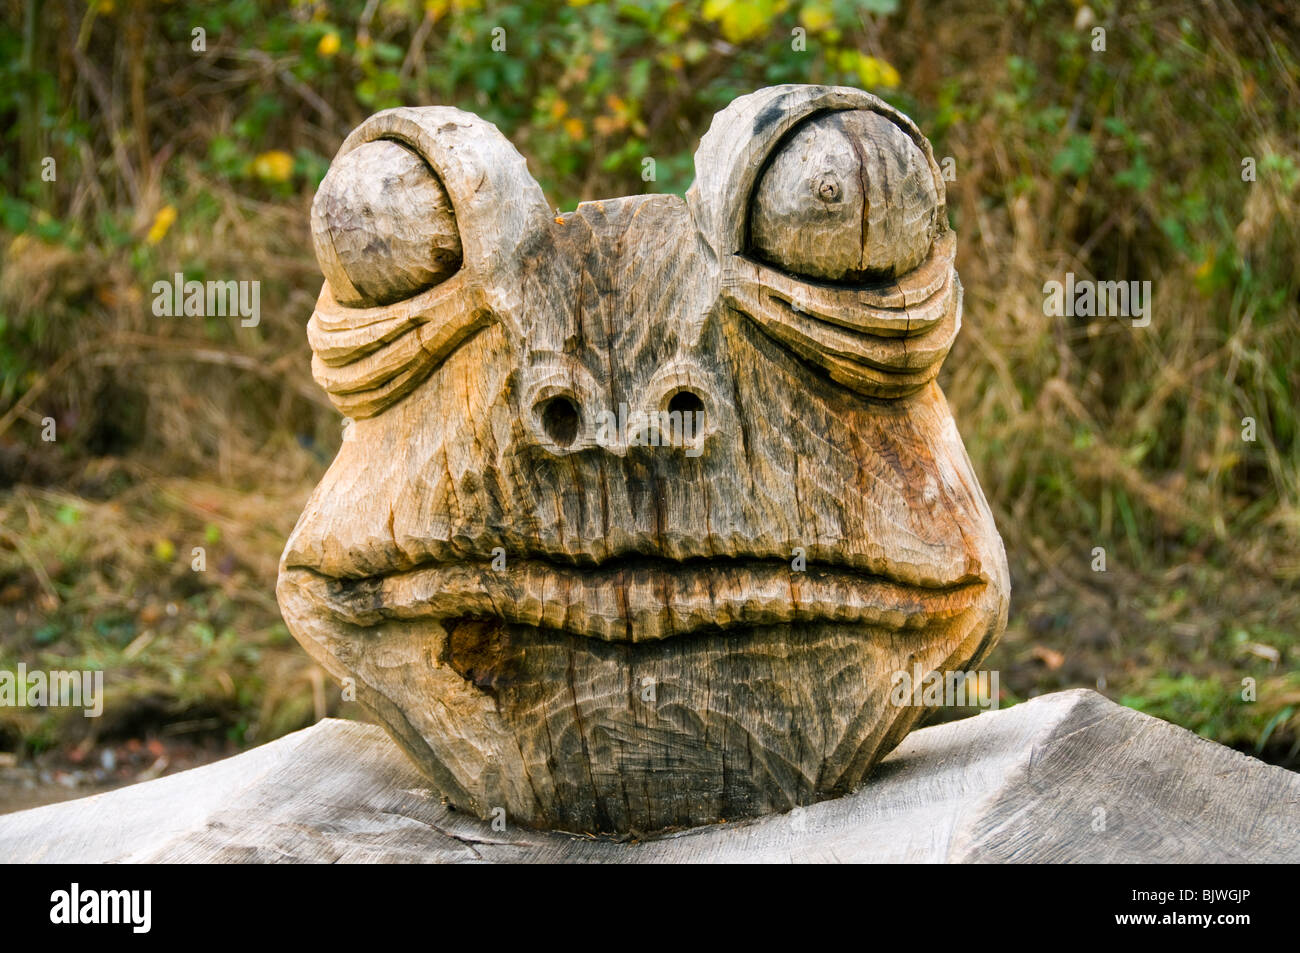 Frog carving at Daisy Nook Country Park, Failsworth, Greater Manchester, England, UK Stock Photo